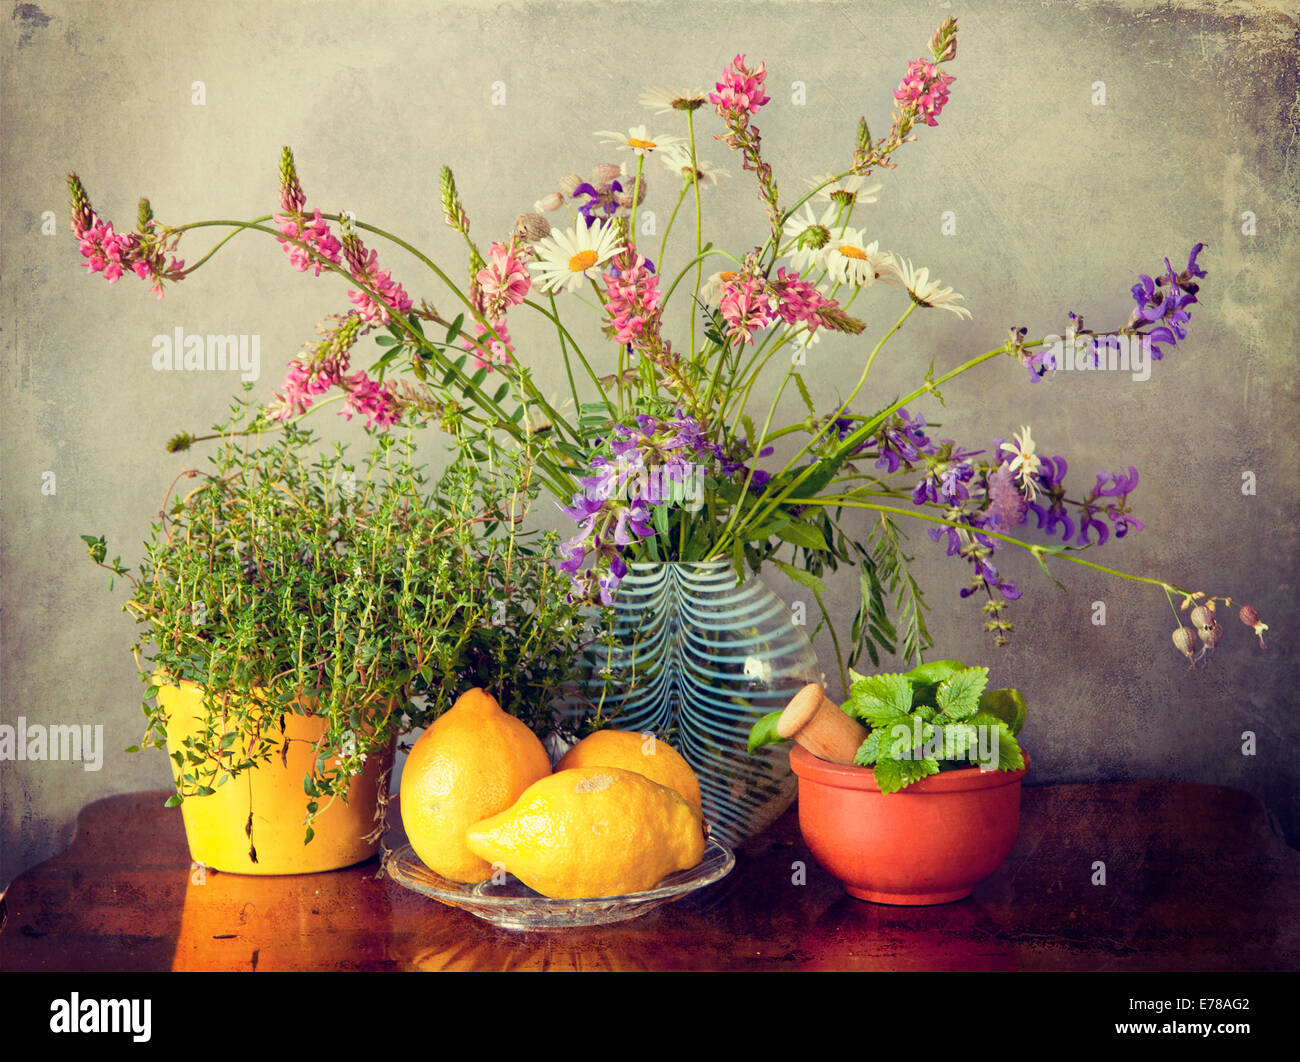 Garden herbs, field flowers in vase and lemon fruits. Grunge texture and Instagram-like retro effect Stock Photo